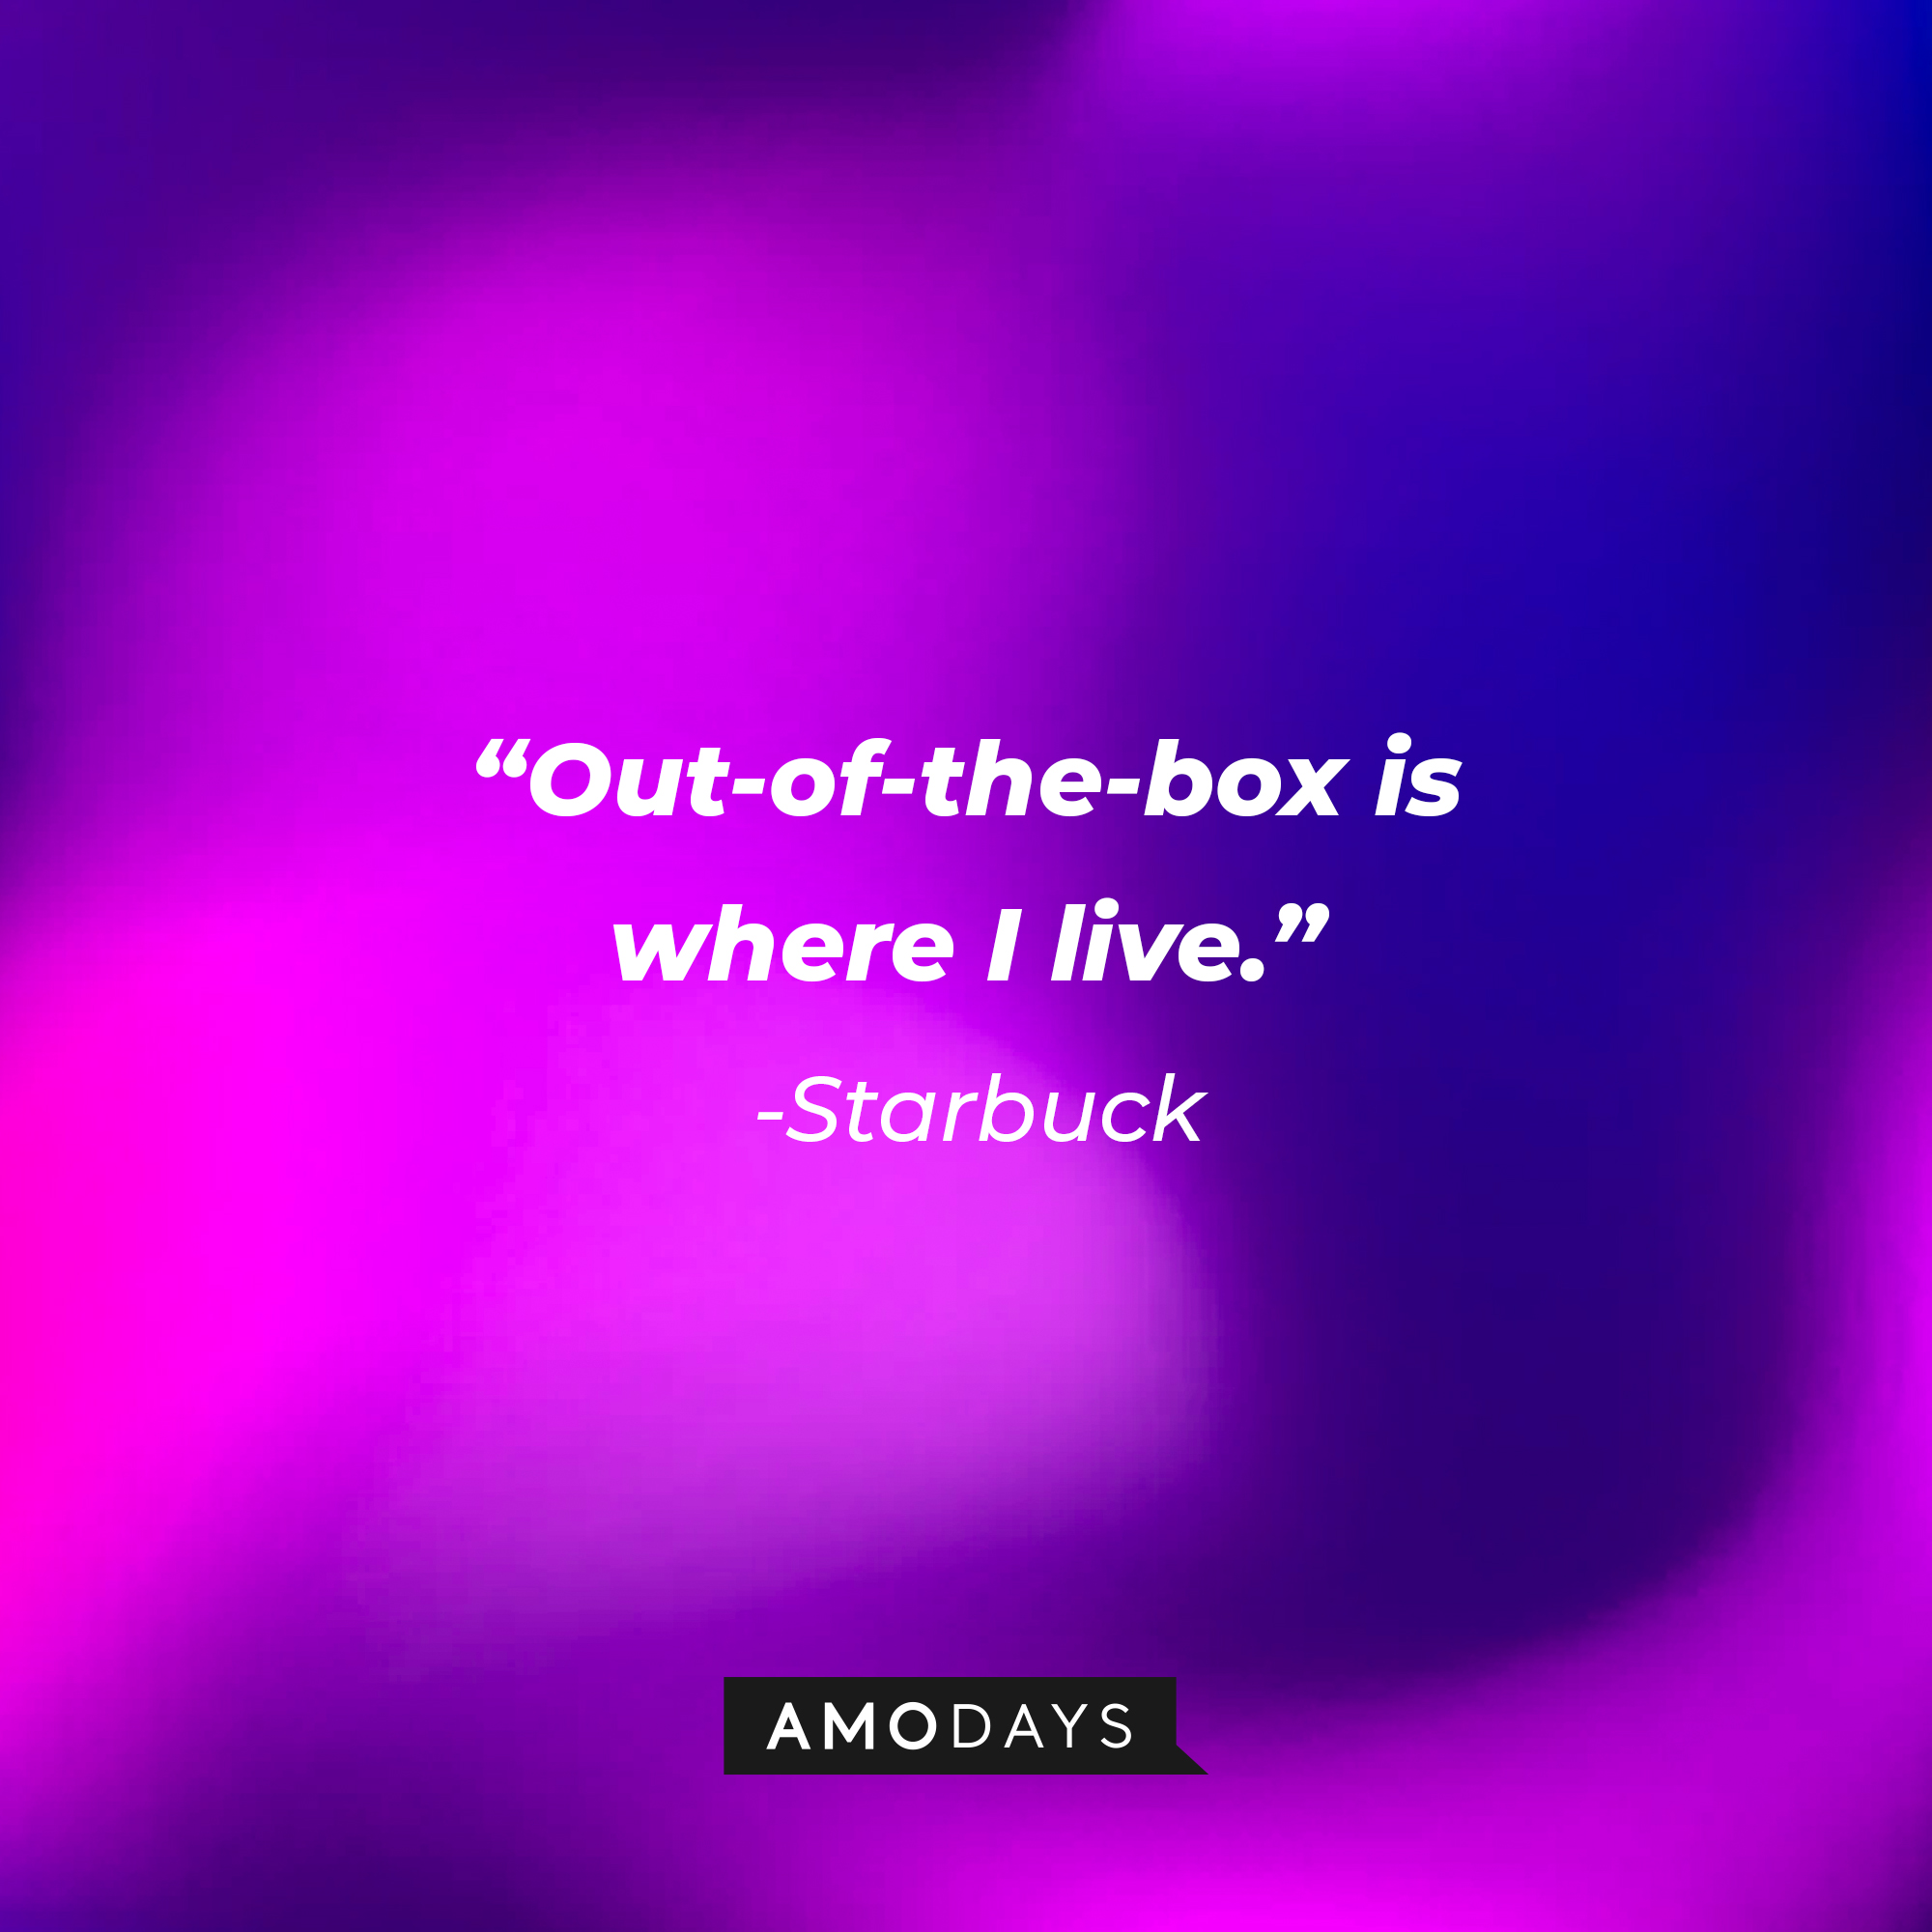 Starbuck’s quote: “Out-of-the-box is where I live.”| Source: AmoDays